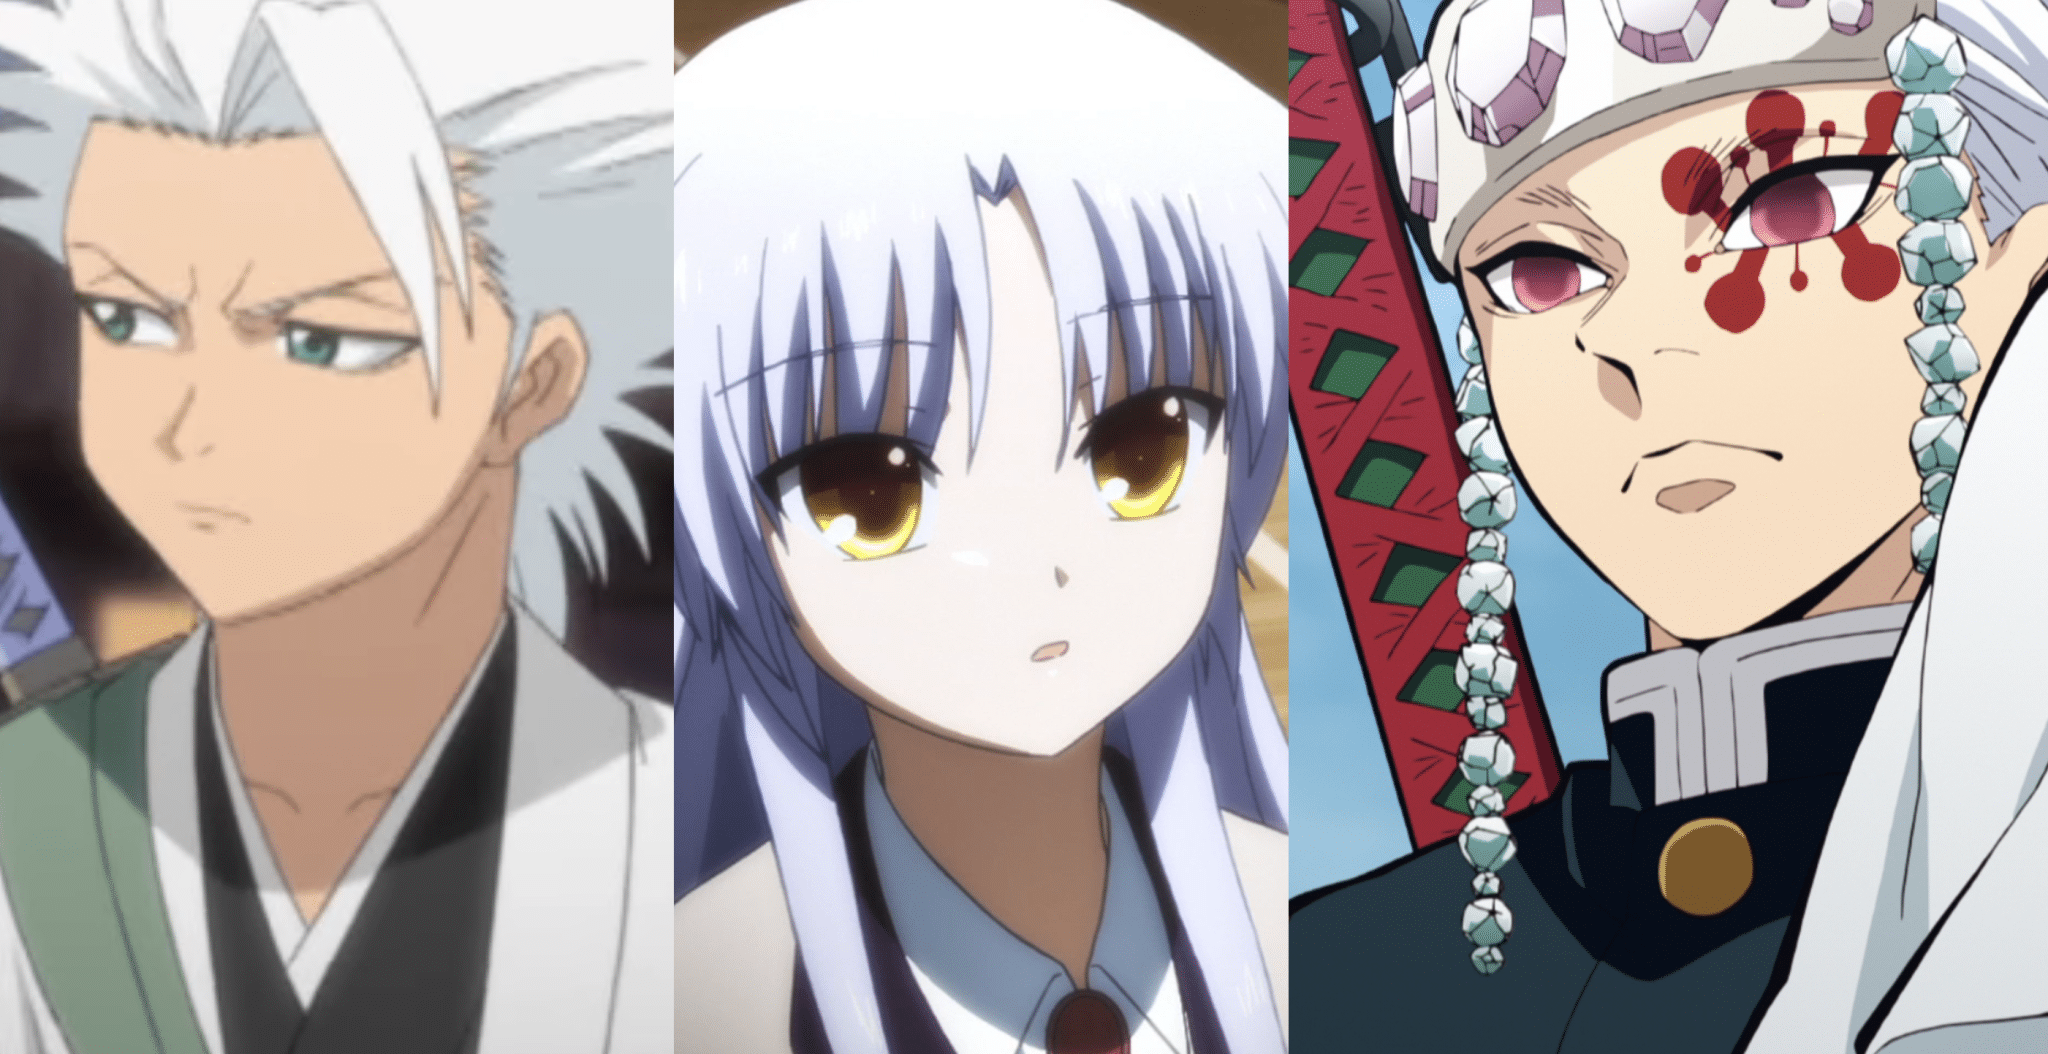 Who is your favorite anime girl with white hair? - Quora